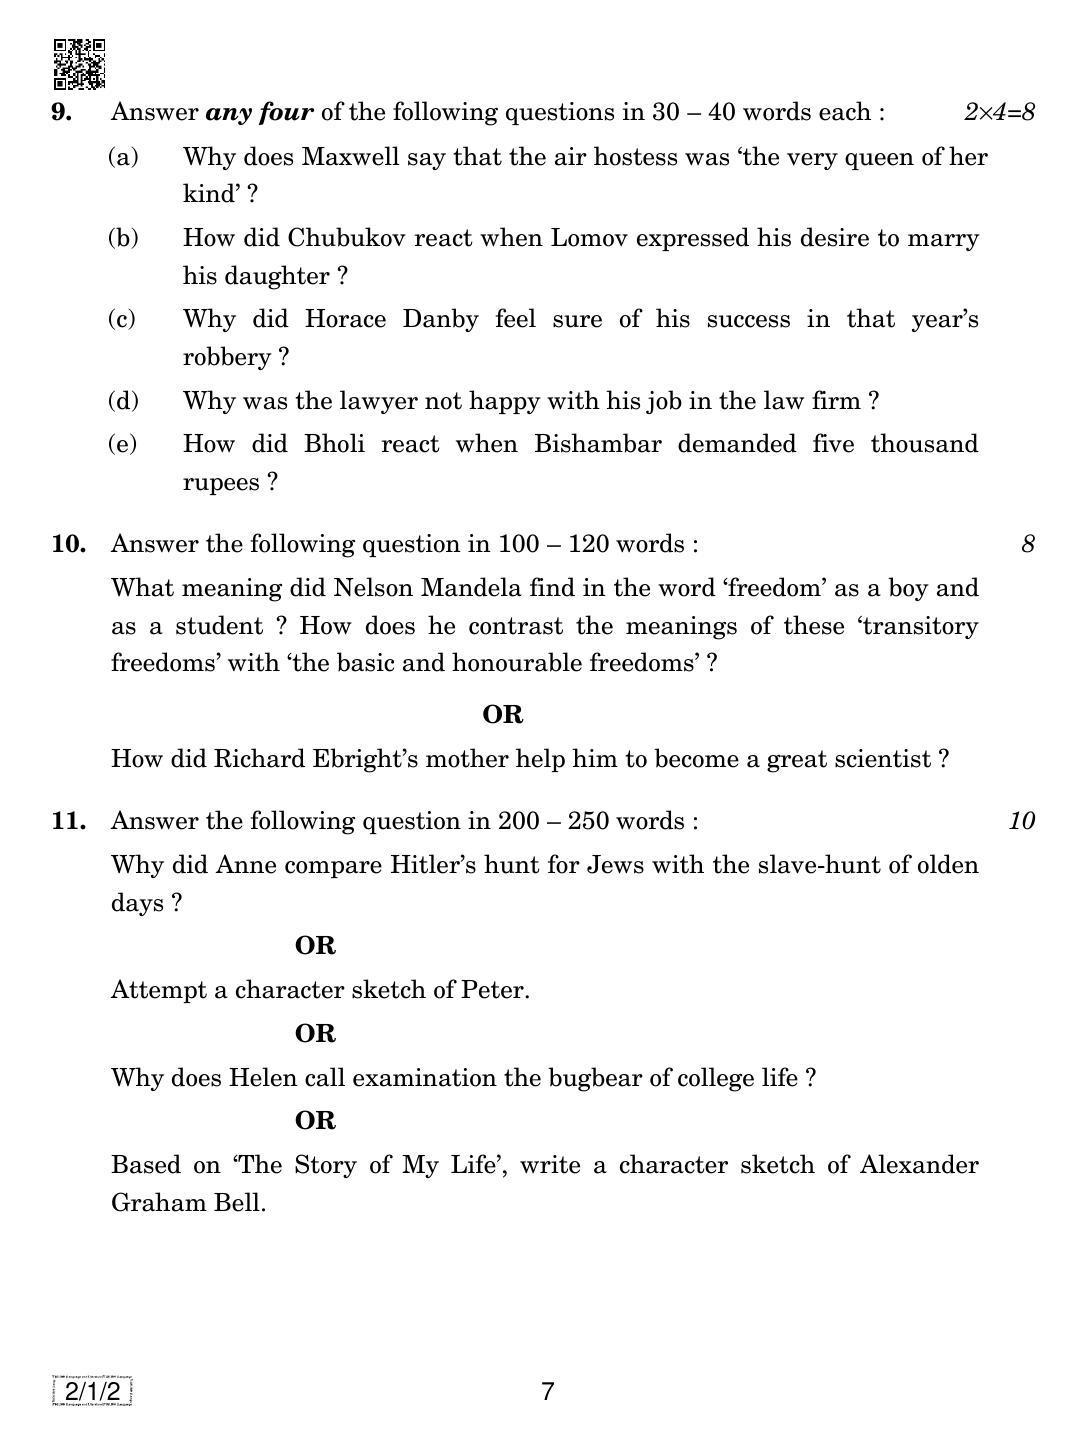 CBSE Class 10 2-1-2 ENGLISH LANG. & LIT. 2019 Compartment Question Paper - Page 7